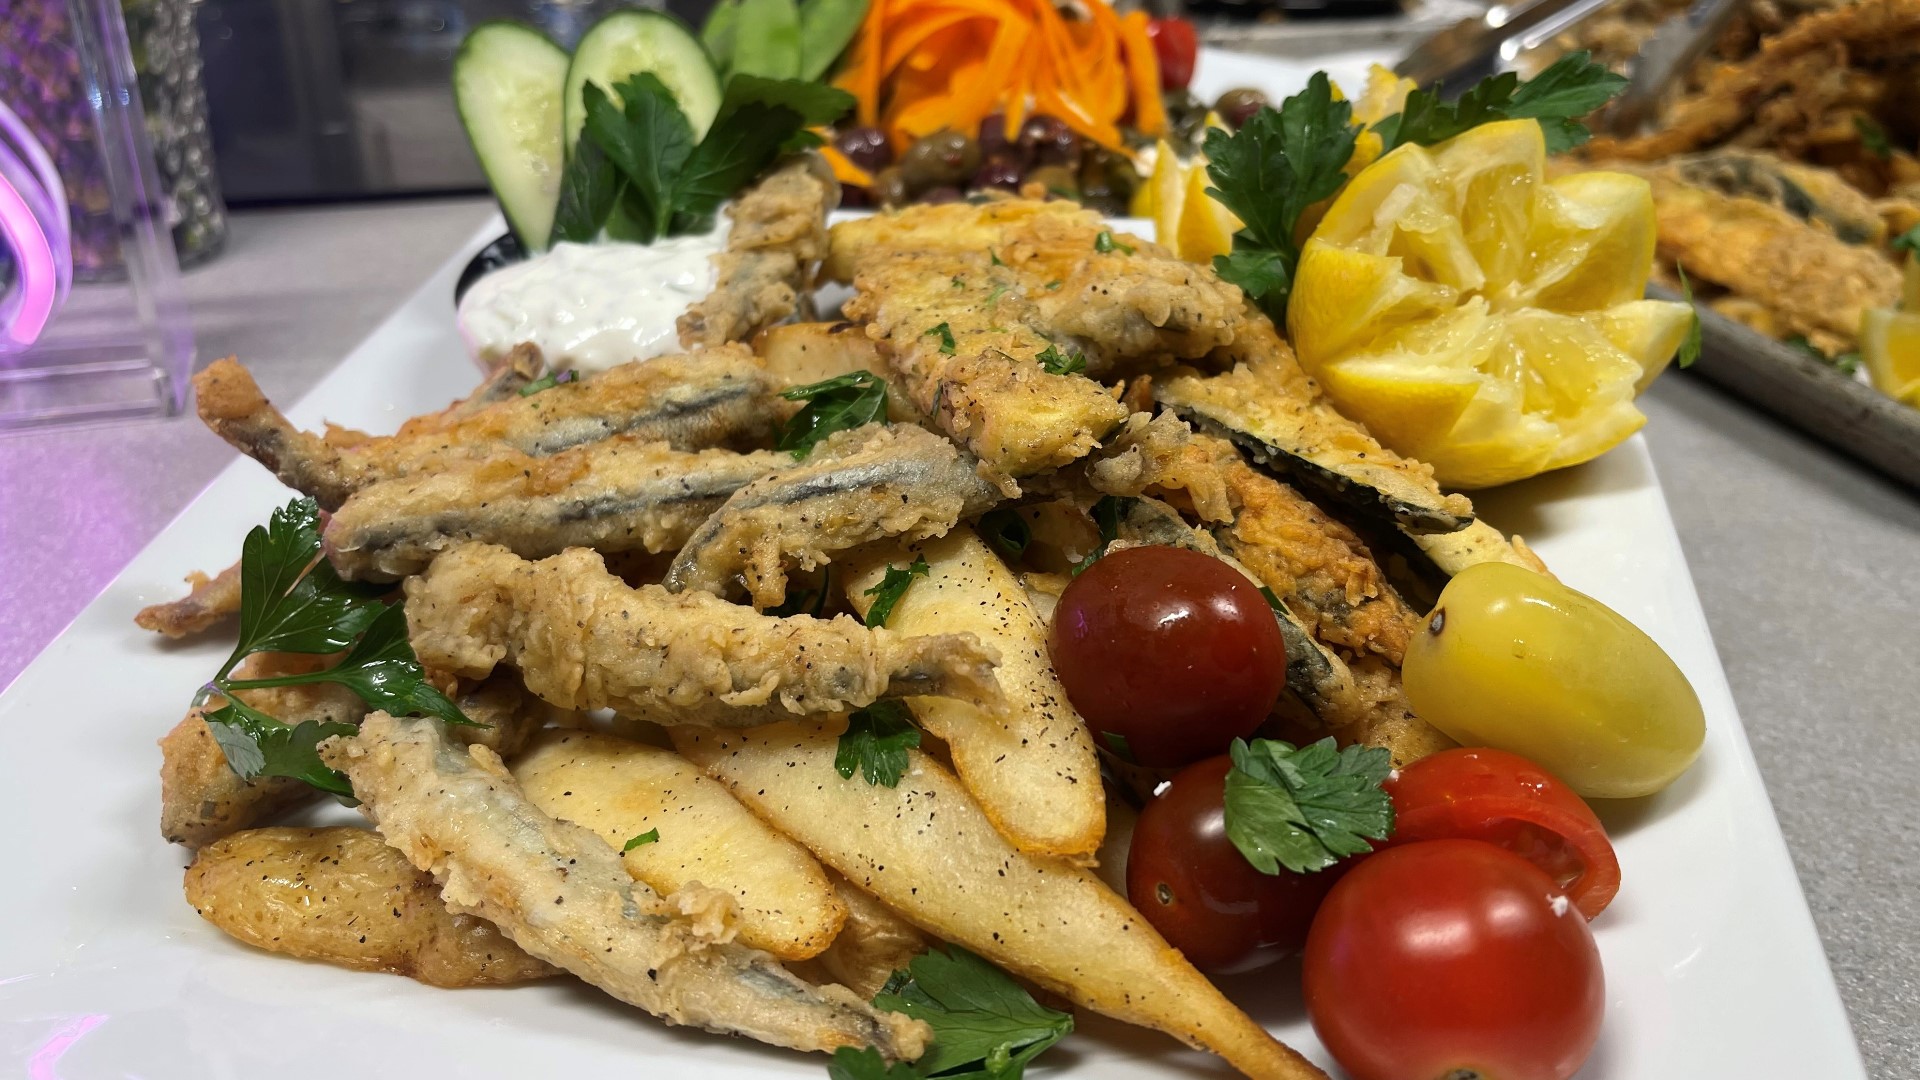 Olivia's fries up fish with a Greek flair. A tipsy dragon cocktail gives the meal a light, fruity finish.